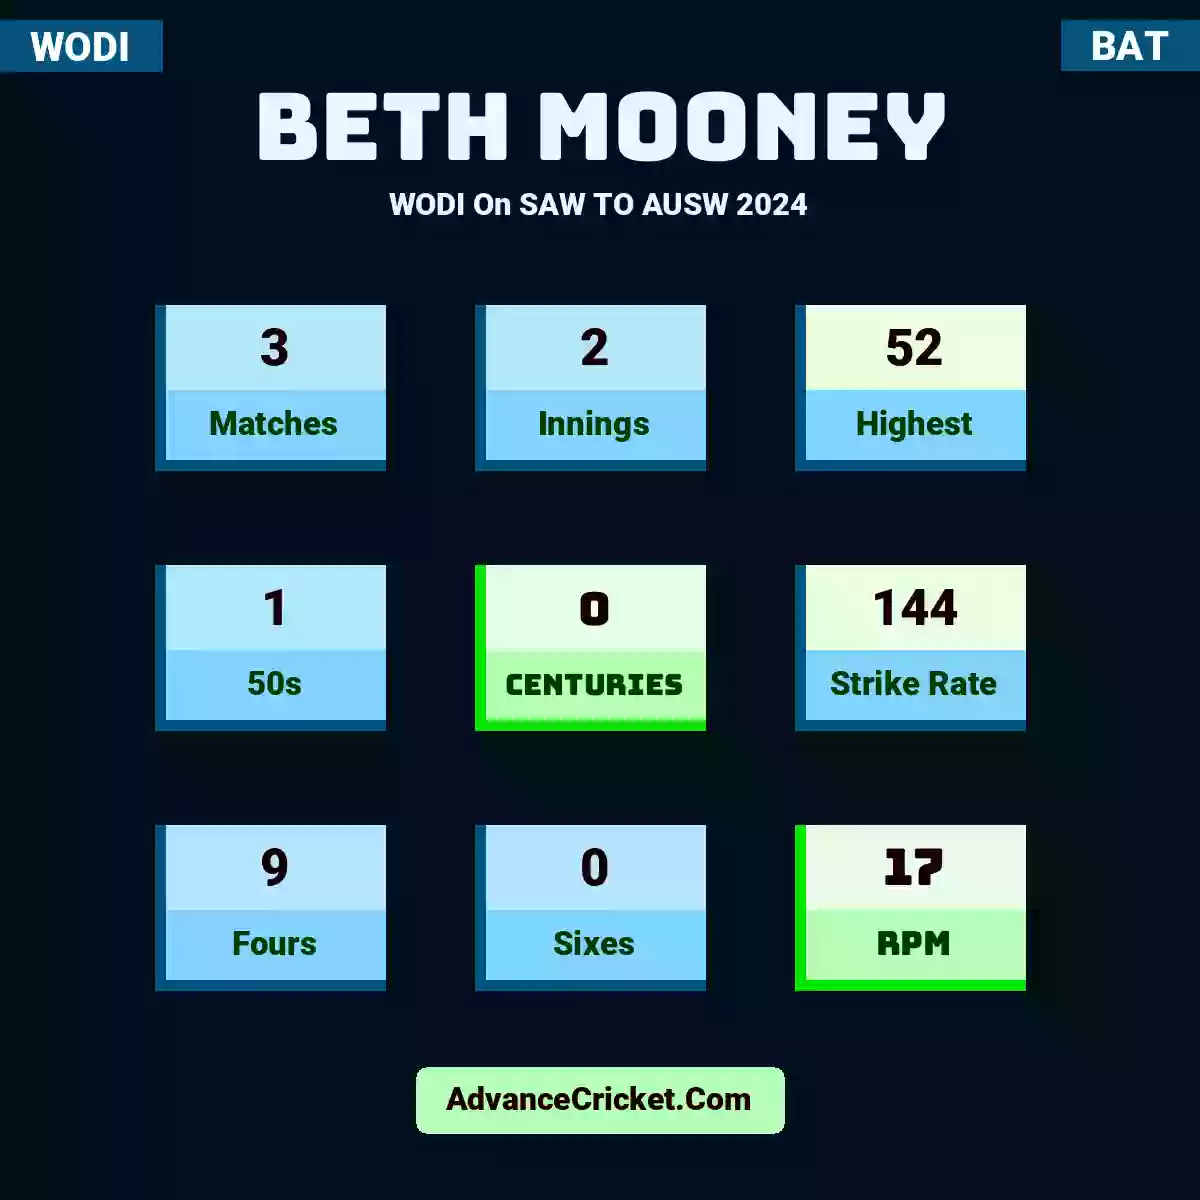 Beth Mooney WODI  On SAW TO AUSW 2024, Beth Mooney played 3 matches, scored 52 runs as highest, 1 half-centuries, and 0 centuries, with a strike rate of 144. B.Mooney hit 9 fours and 0 sixes, with an RPM of 17.